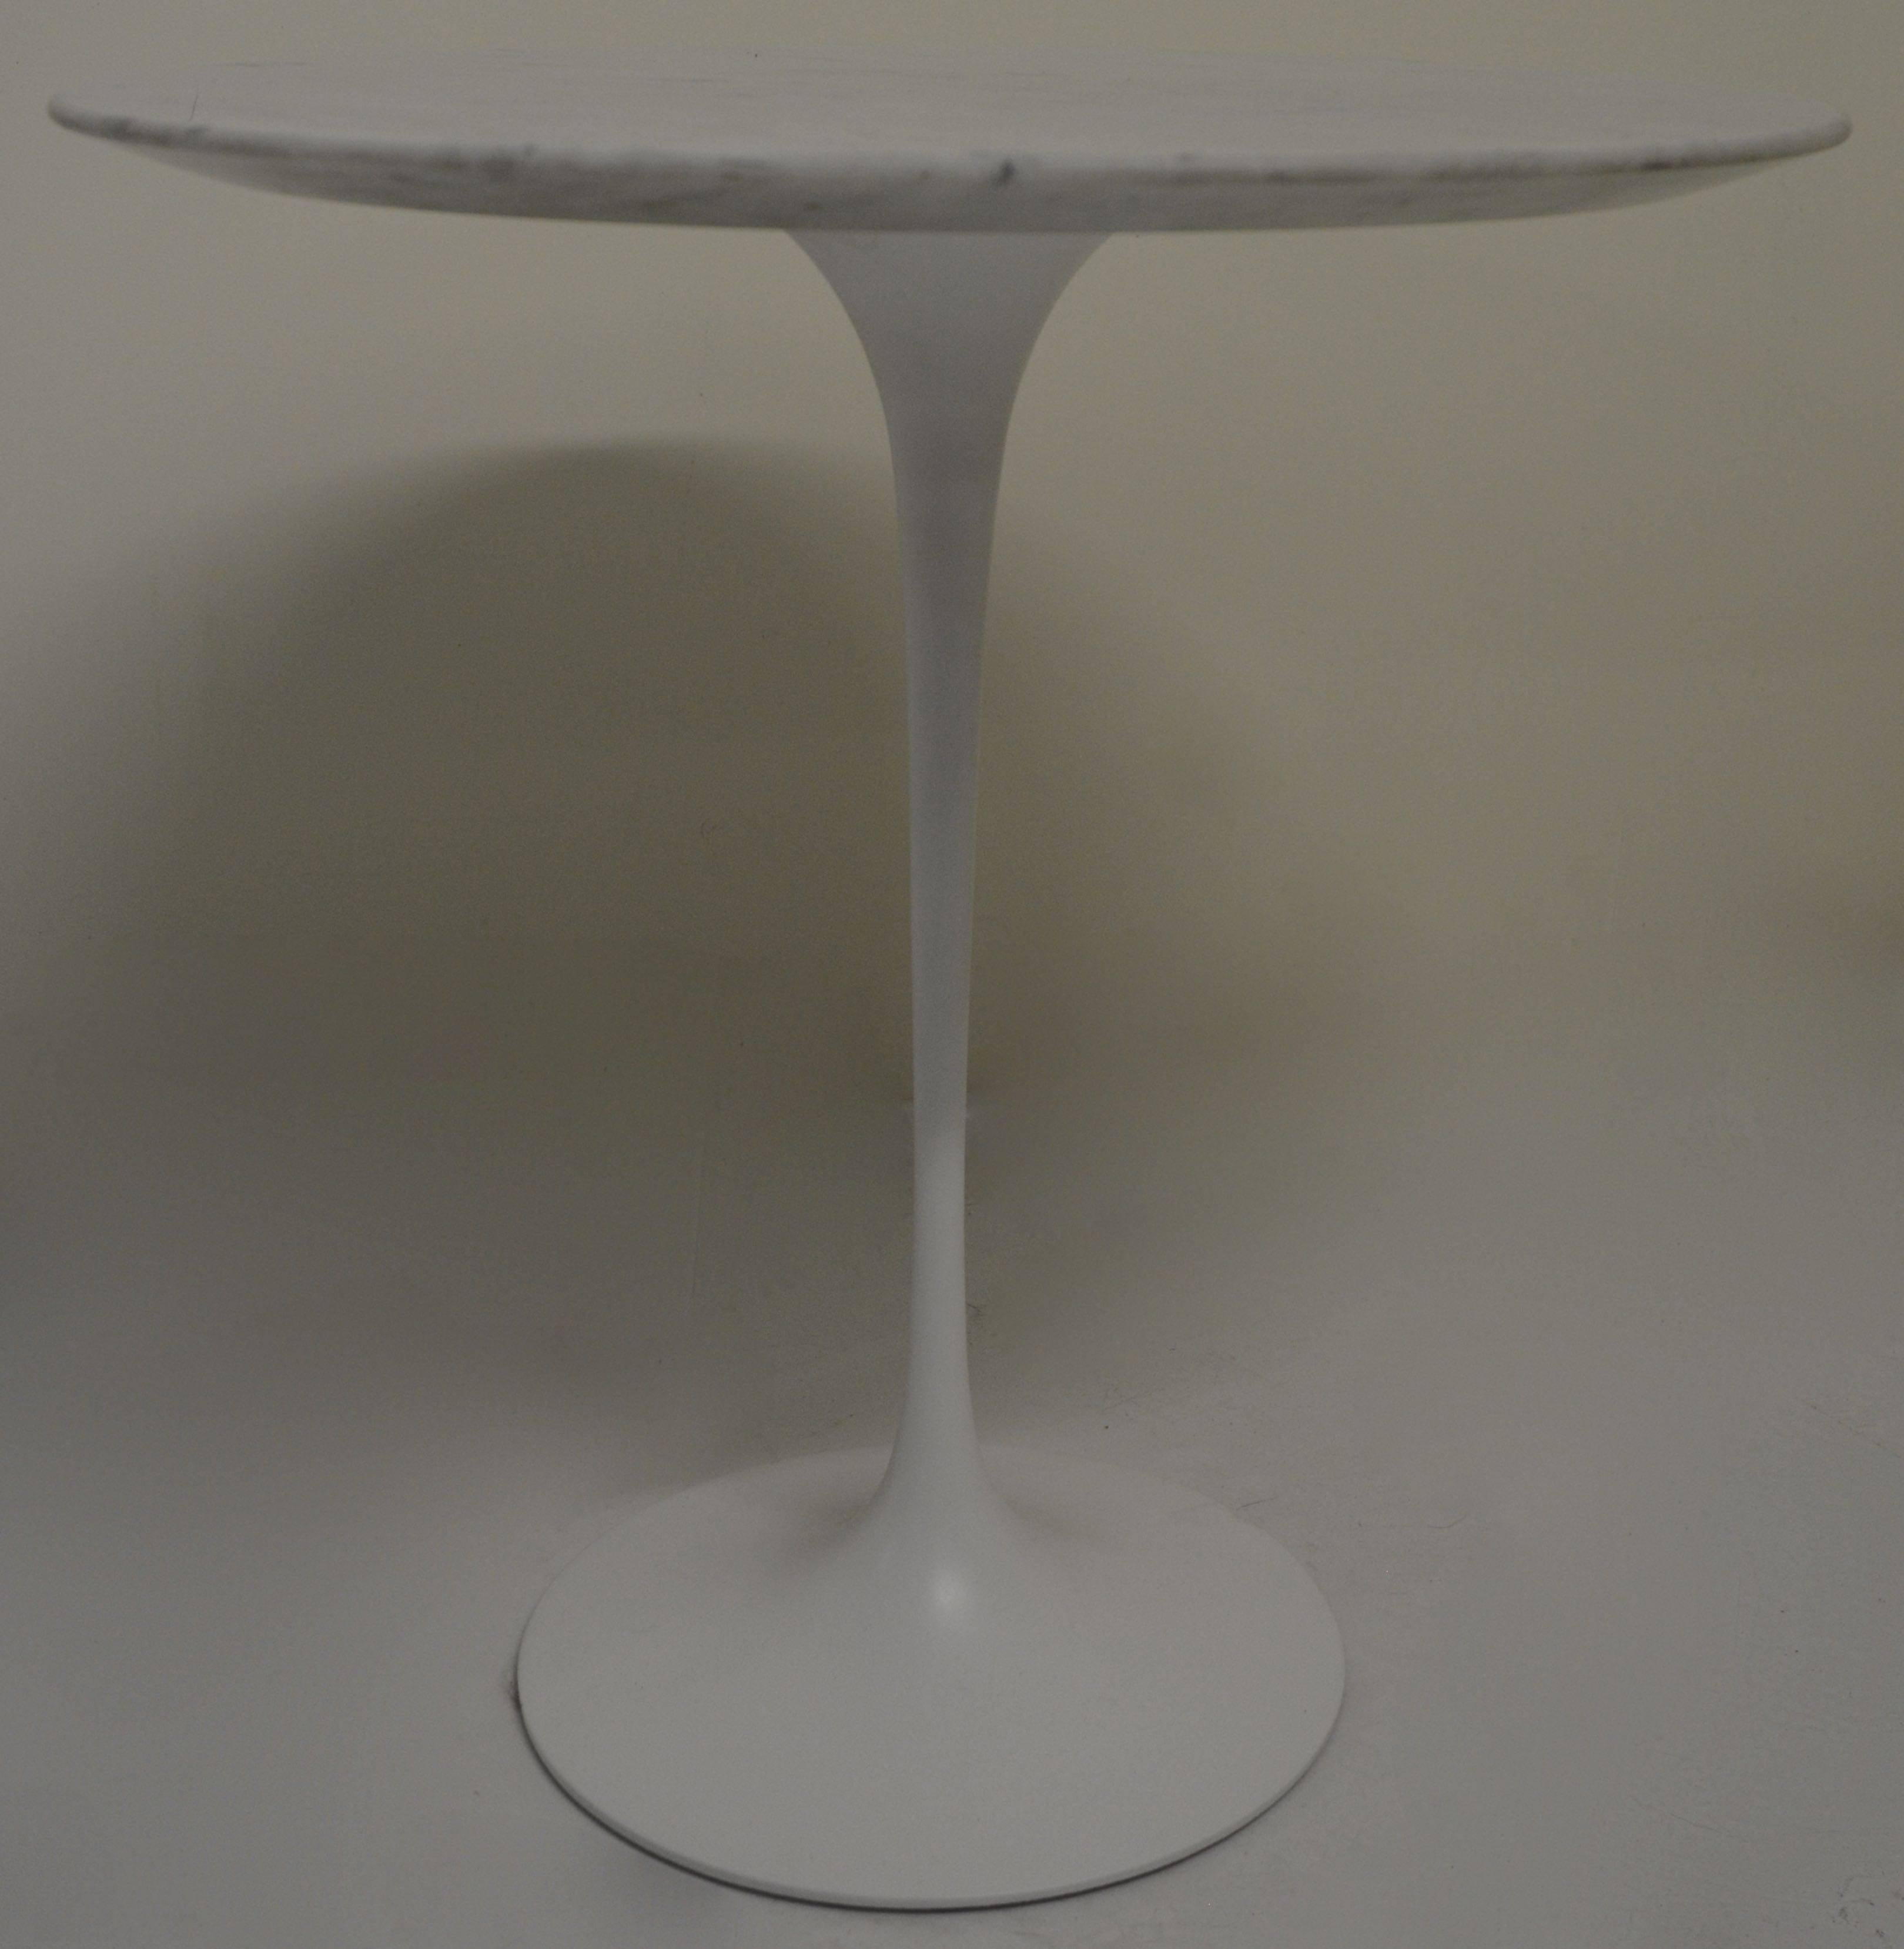 Knoll Tulip occasional table in Carrara marble, circa 1950s. Excellent original condition of marble with newly lacquered base. Original Fabric tag is located under top, attached to base.